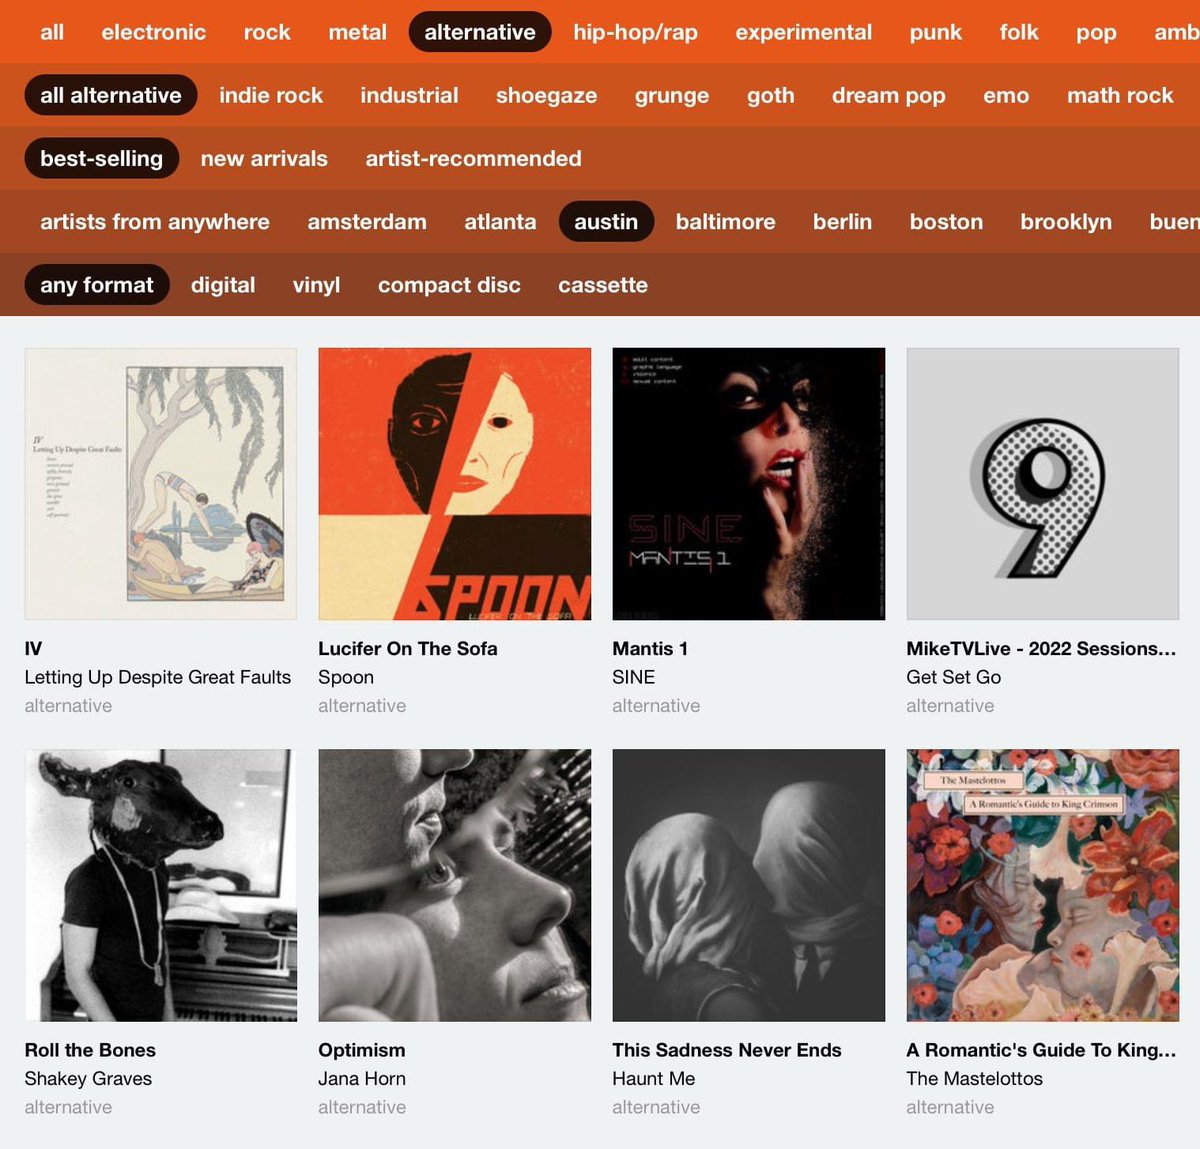 Even if it's just for one day...I'M SO PROUD! Mantis 1 by SINE is on the front page of Bandcamp Best Selling Alternative in Austin, TX! Thanks to all that are making it happen! @eHeartsATX @AustinChronicle @txmusicoffice #austinmusic #texasmusic 🌠 bandcamp.com/?g=alternative…